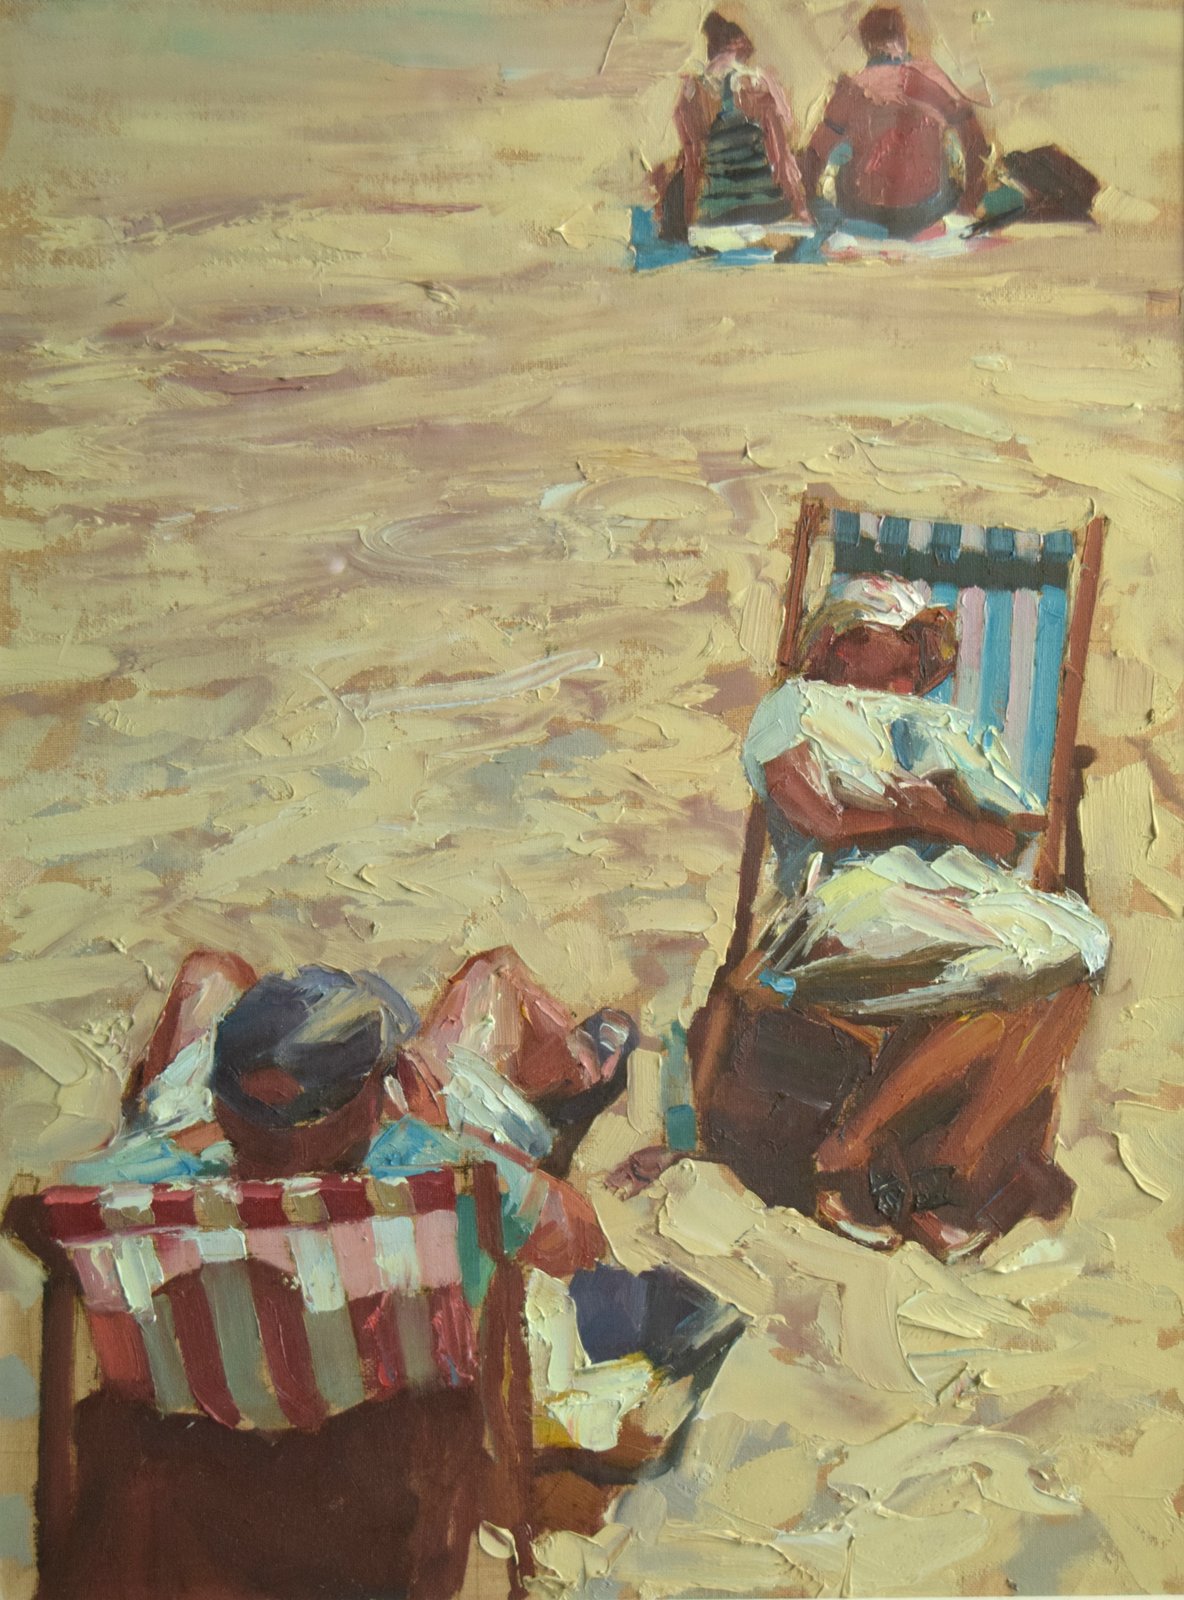 Portrait-shaped oil of 2 figures on deck chairs enjoying the sunshine, painted with thick, impasto oil paint by Mark Shattock